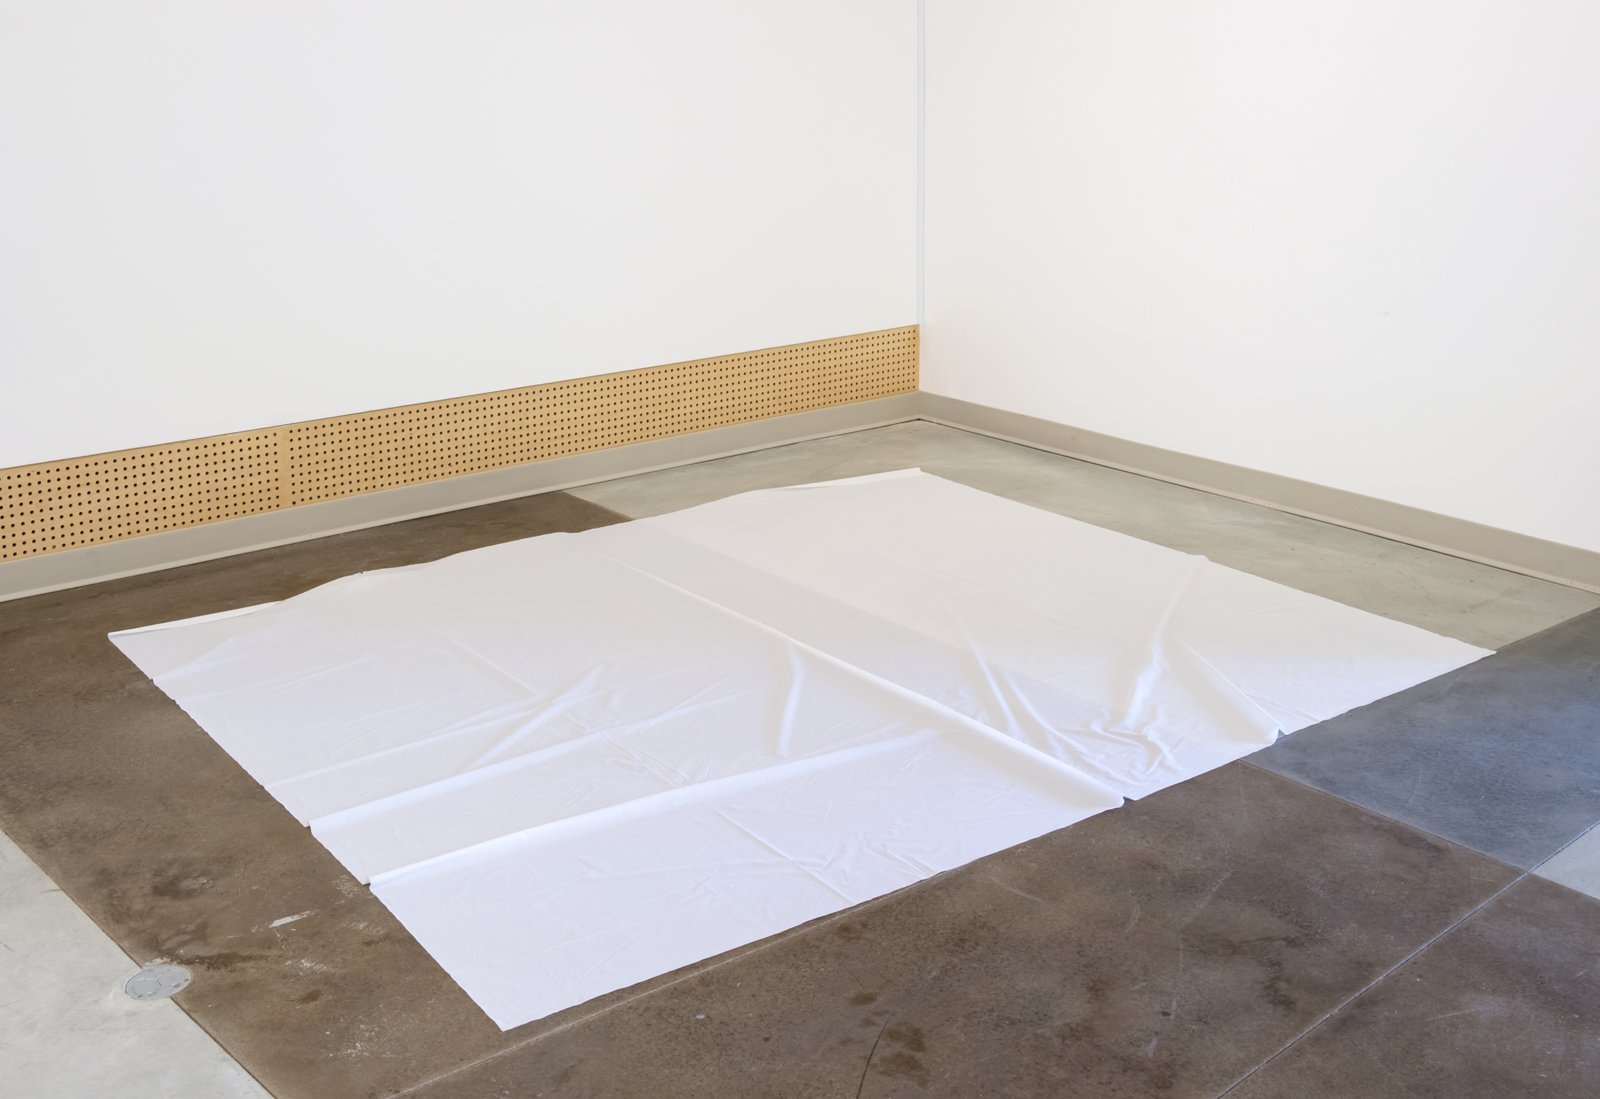 Abbas Akhavan, After “Untitled”, 2017, single ply tissue paper, 60 x 80 in. (152 x 203 cm)